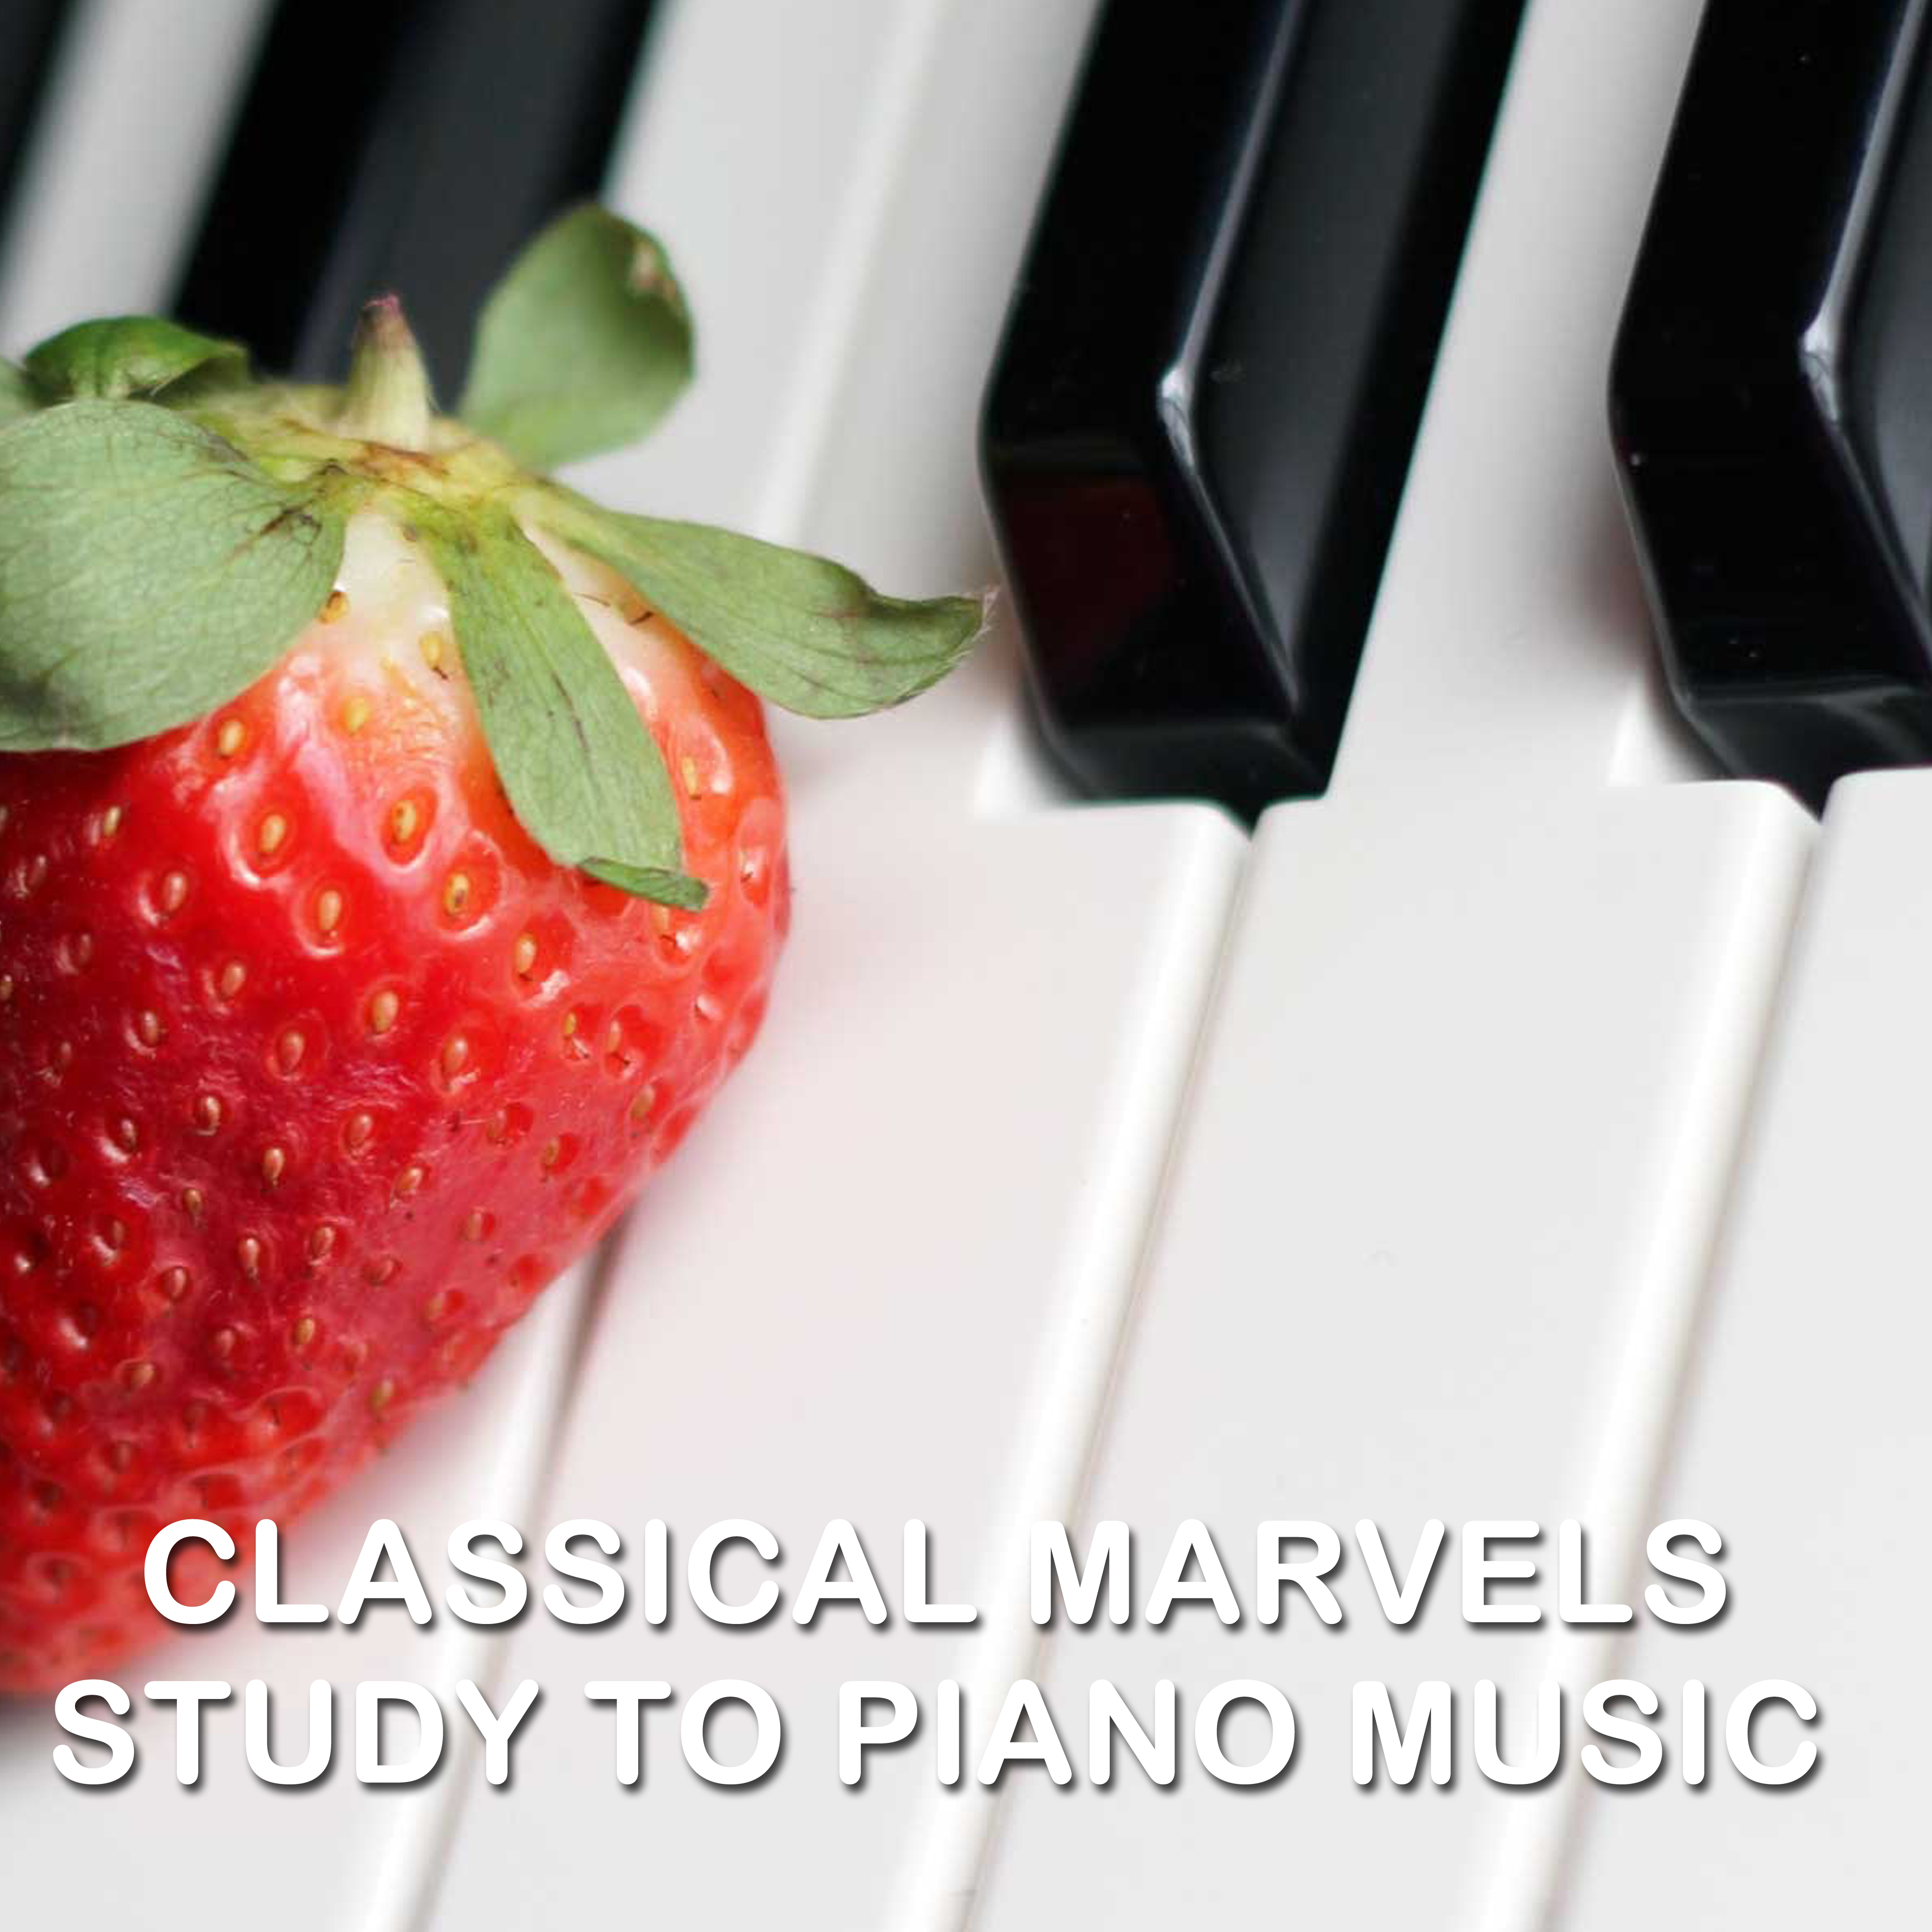 11 Classical Marvels: Study to Piano Music